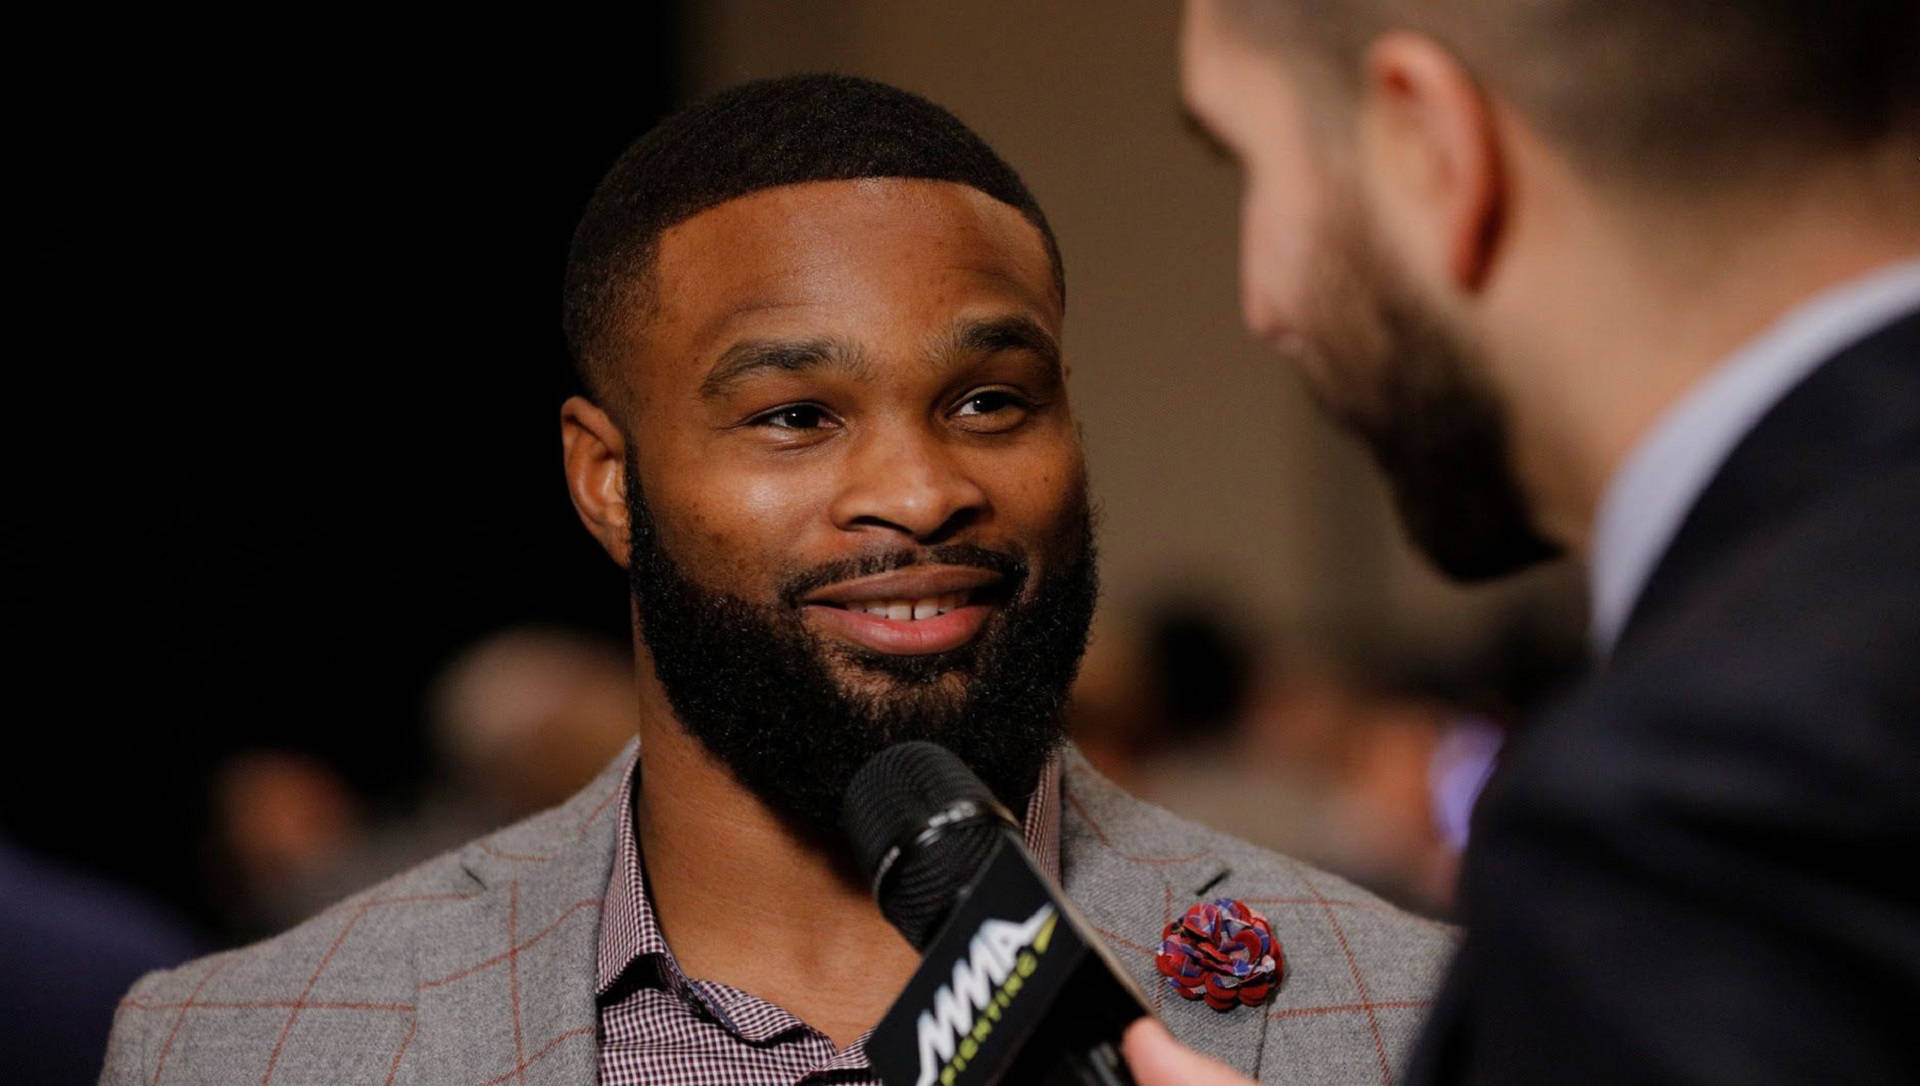 Tyron Woodley In Light Grey Suit